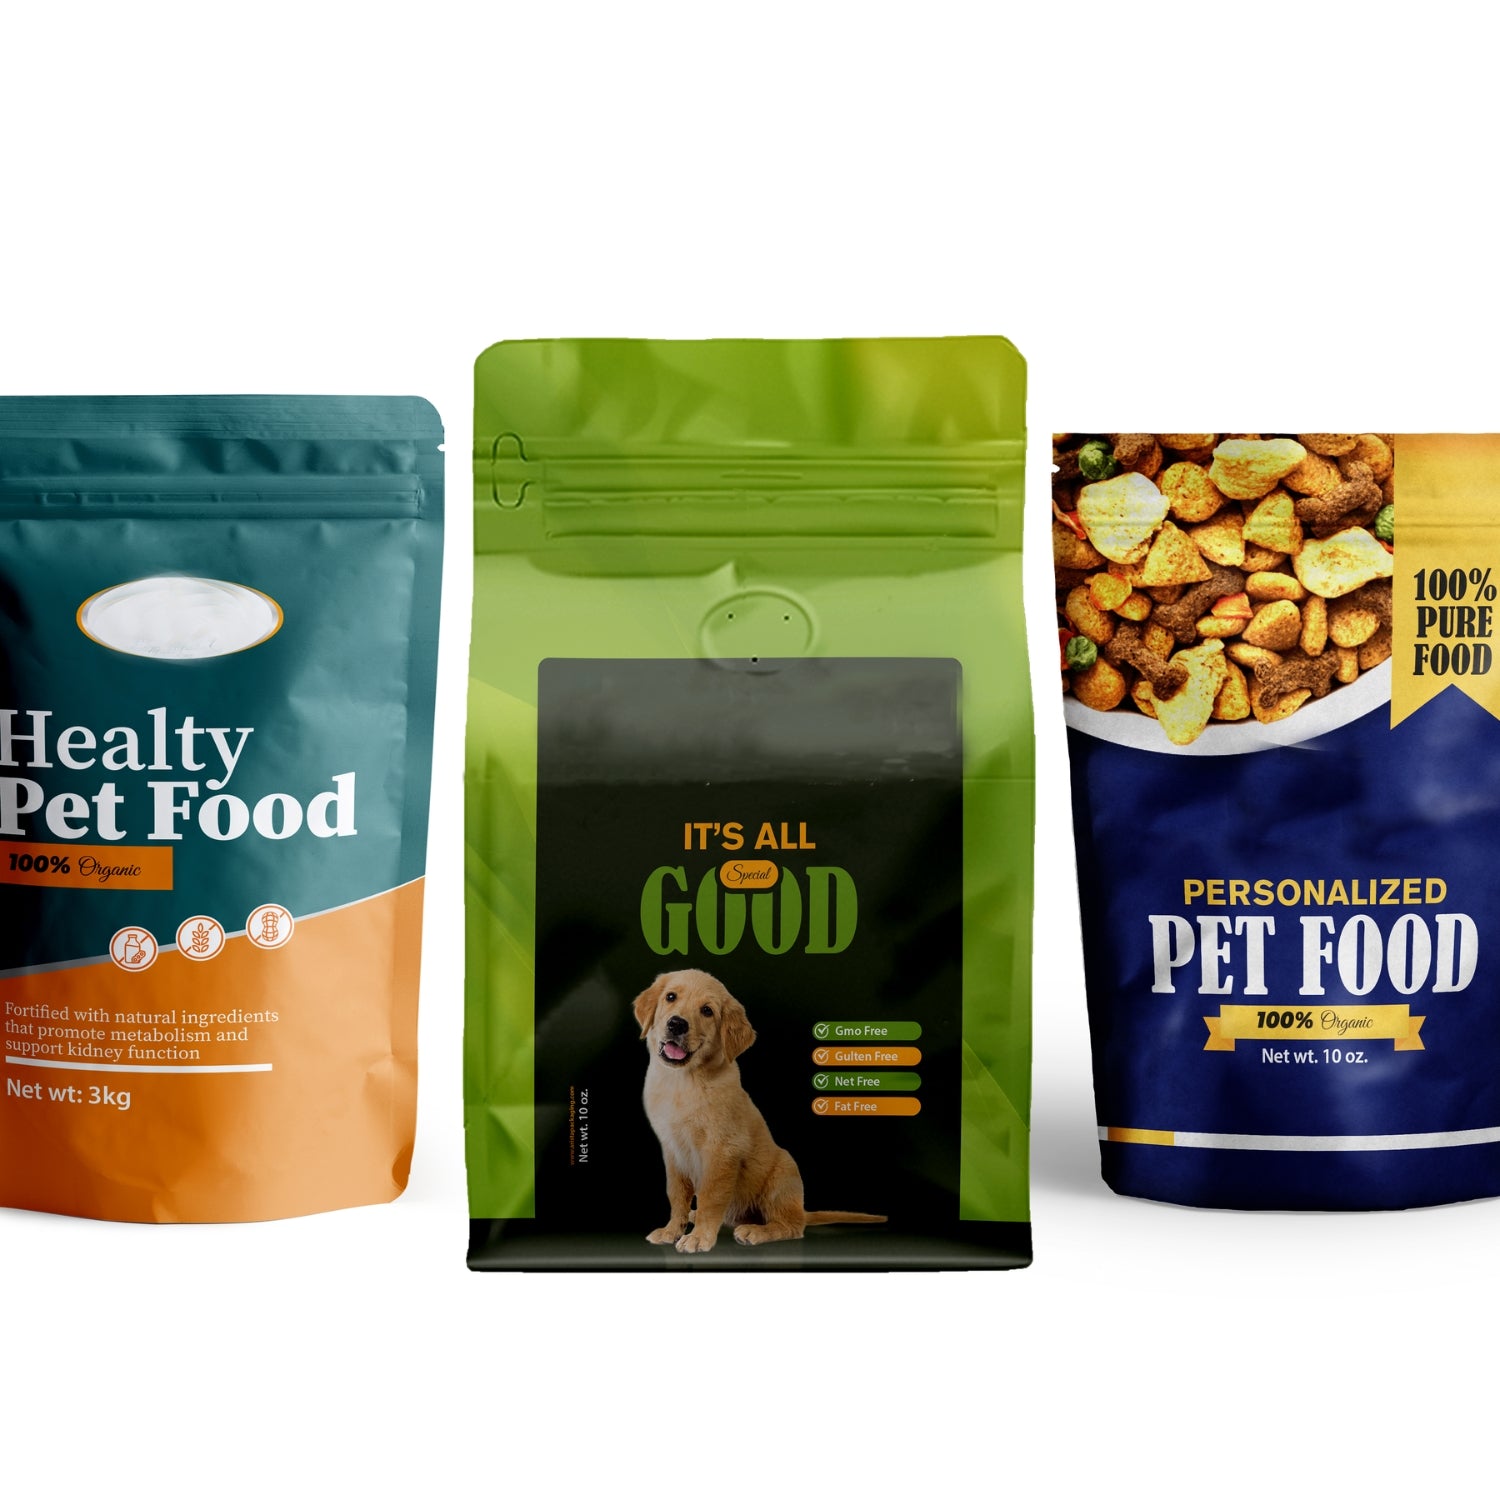 Petcare product packaging and petfood packaging